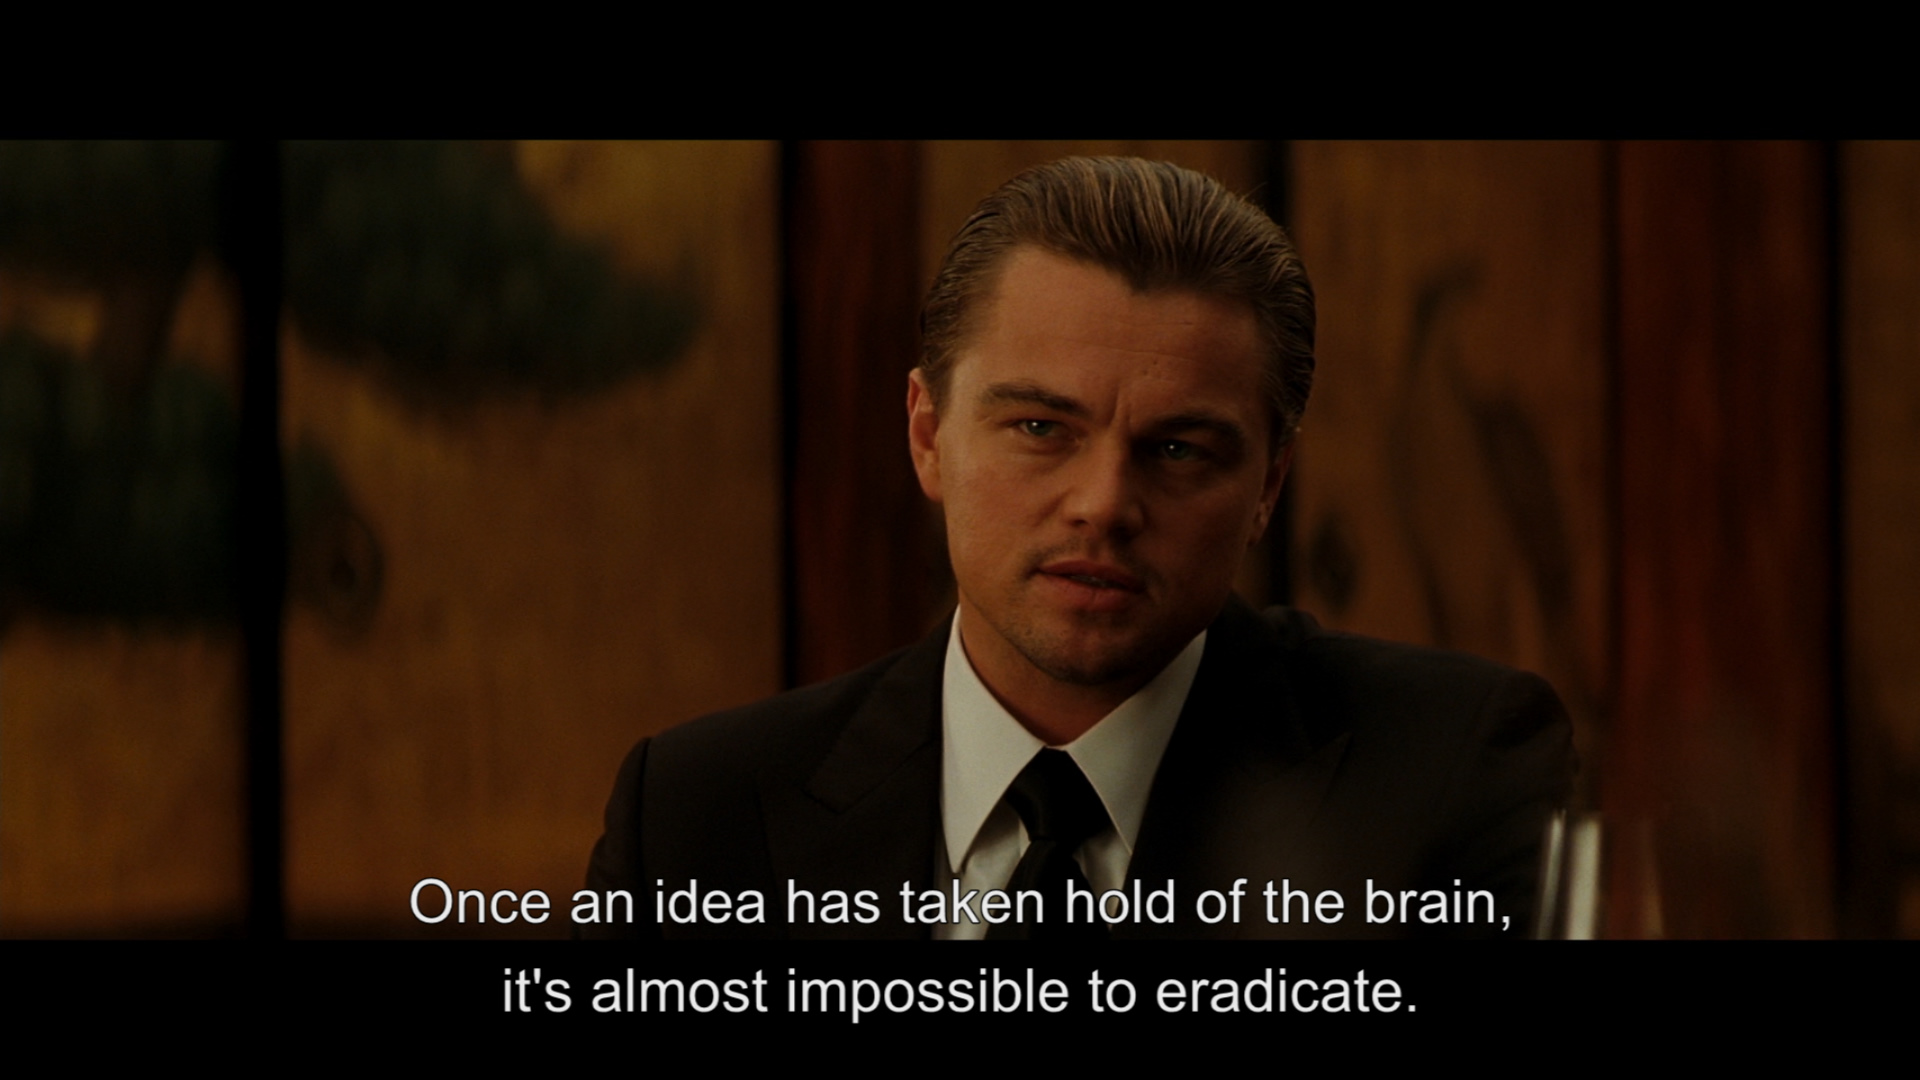 Inception Movie With English Subtitles Full.zip. 